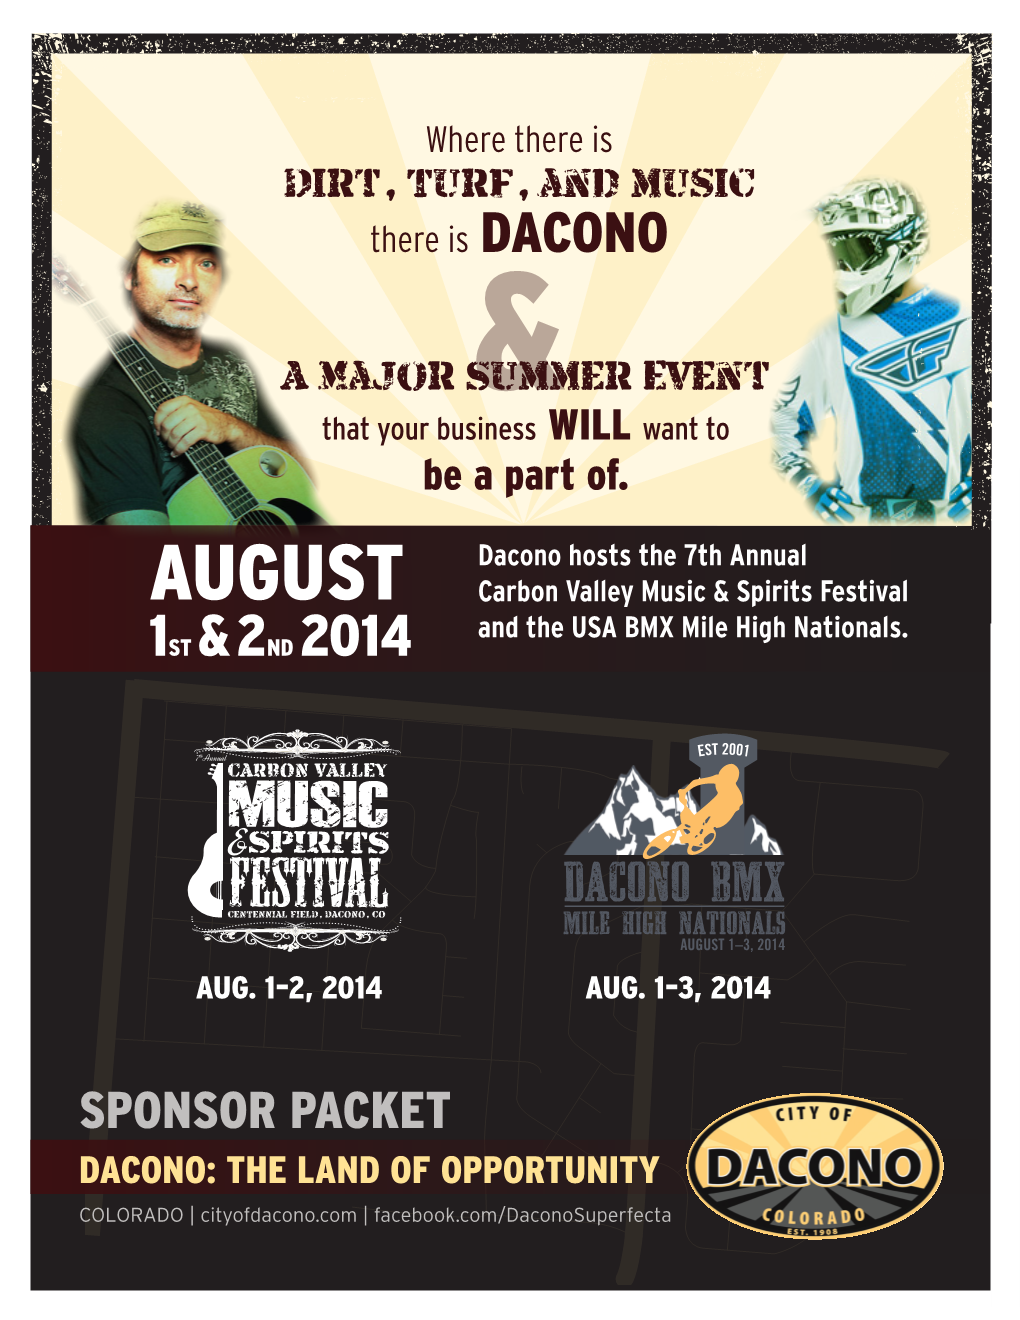 AUGUST Carbon Valley Music & Spirits Festival and the USA BMX Mile High Nationals